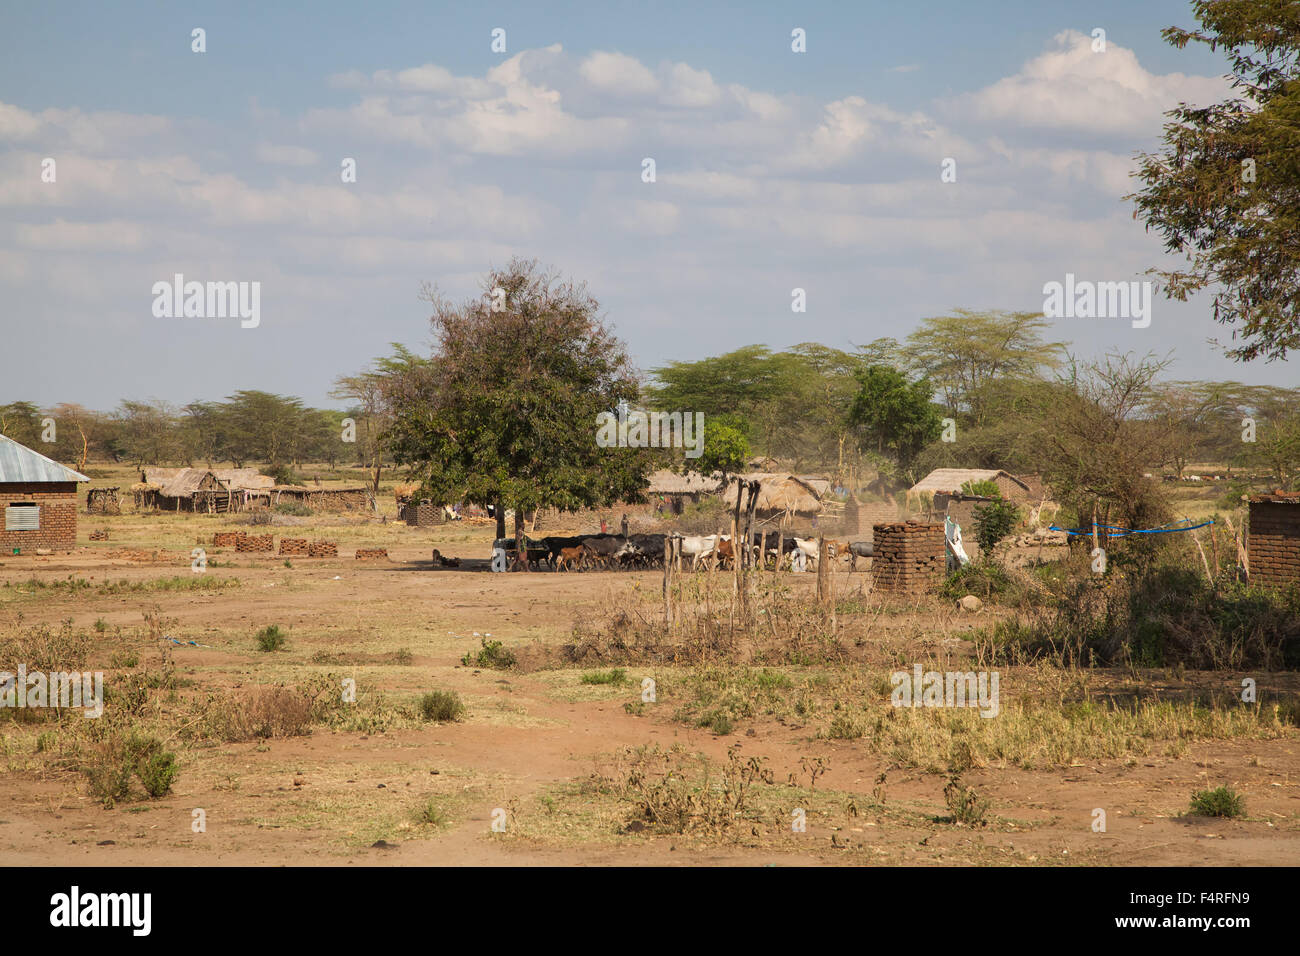 Africa, village, house, home, domestic animals, houses, homes, scenery, landscape, travel, Tanzania Stock Photo